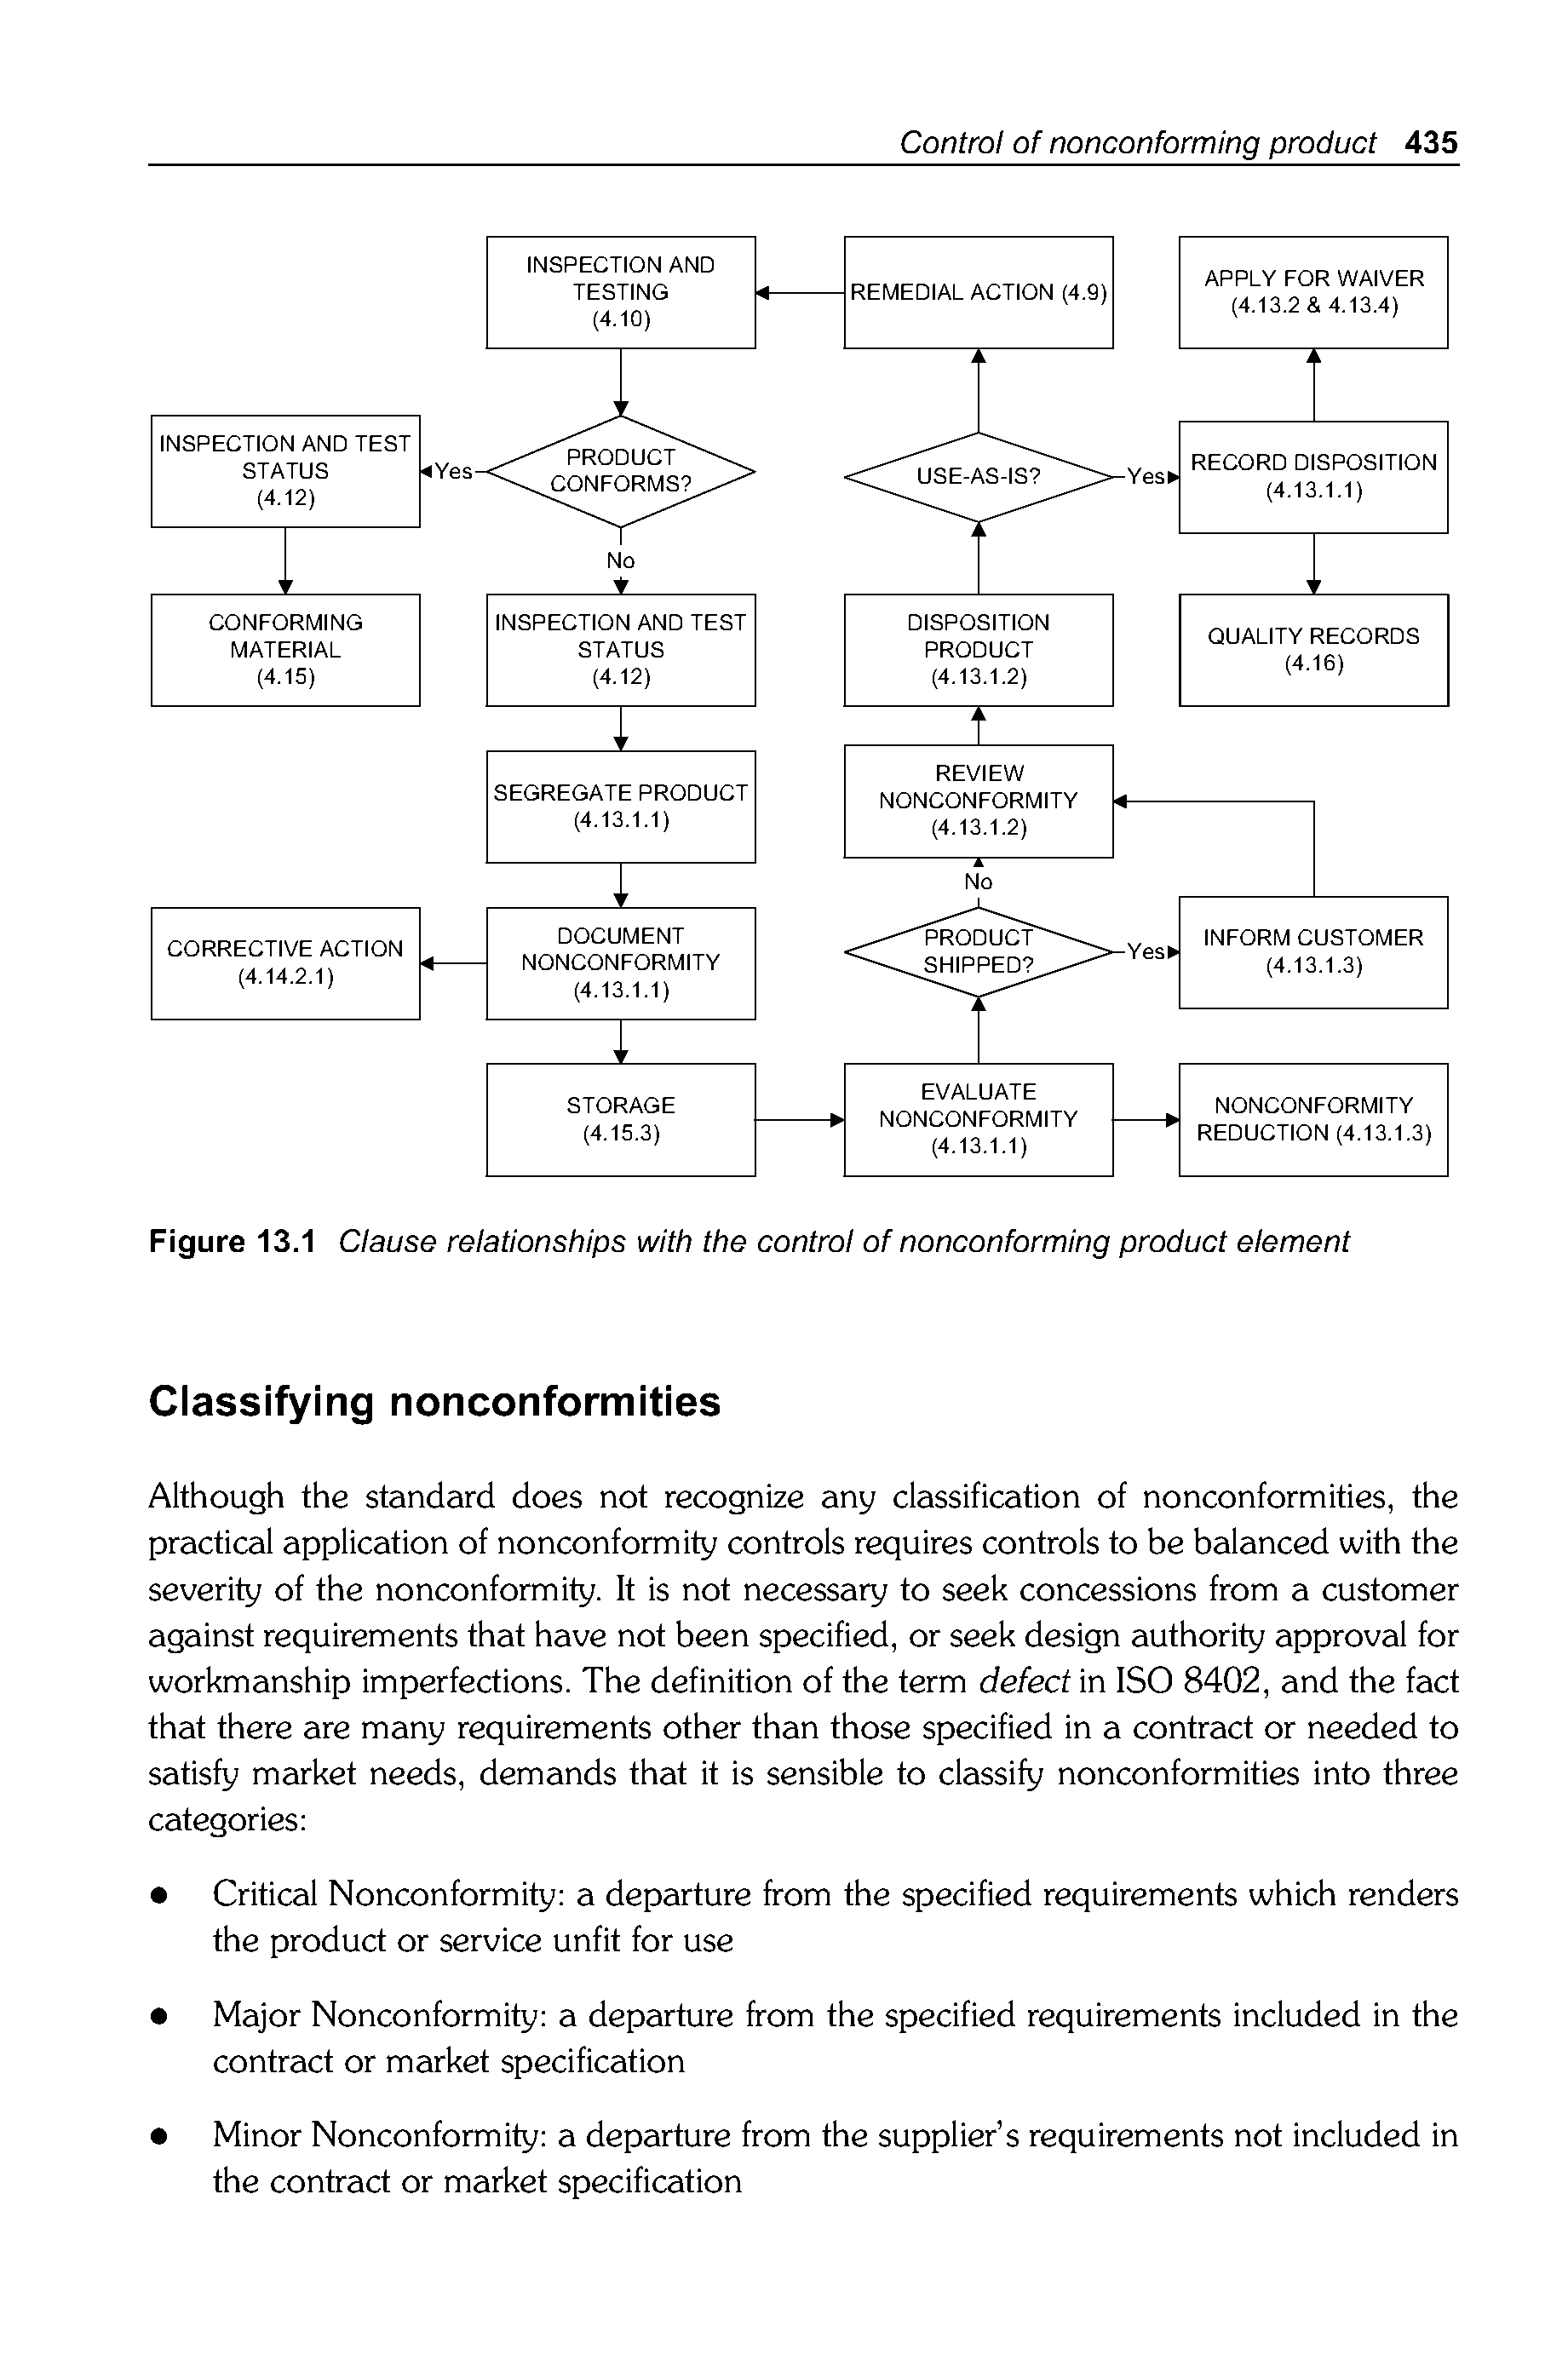 Figure 13.1 Clause relationships with the control of nonconforming product element...